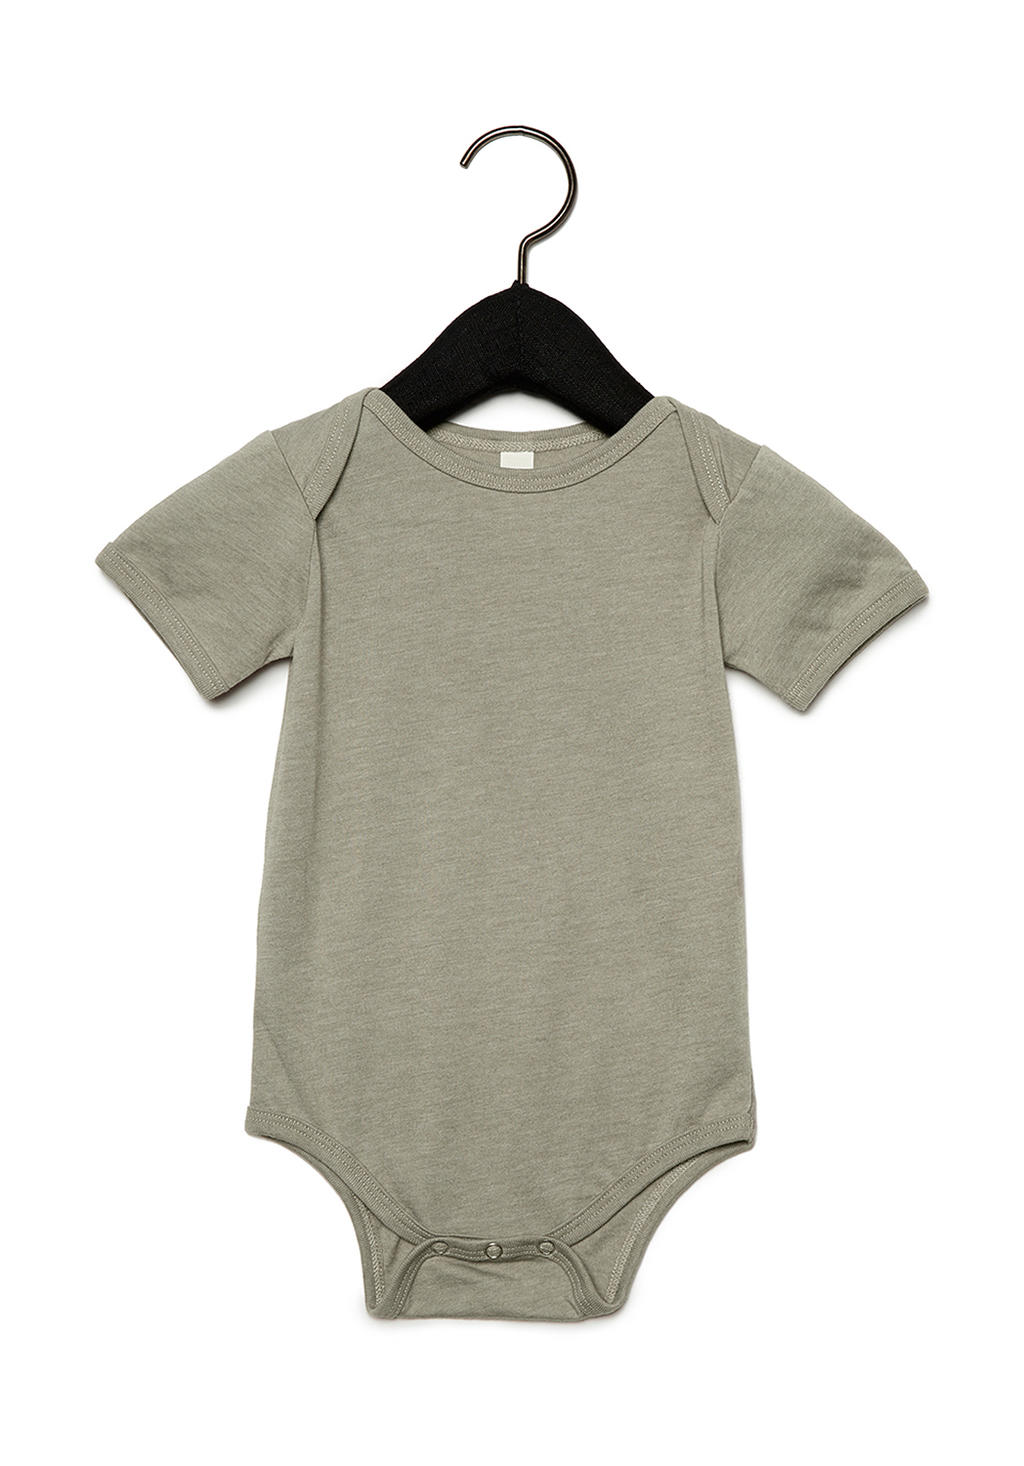  Baby Jersey Short Sleeve One Piece in Farbe Heather Stone